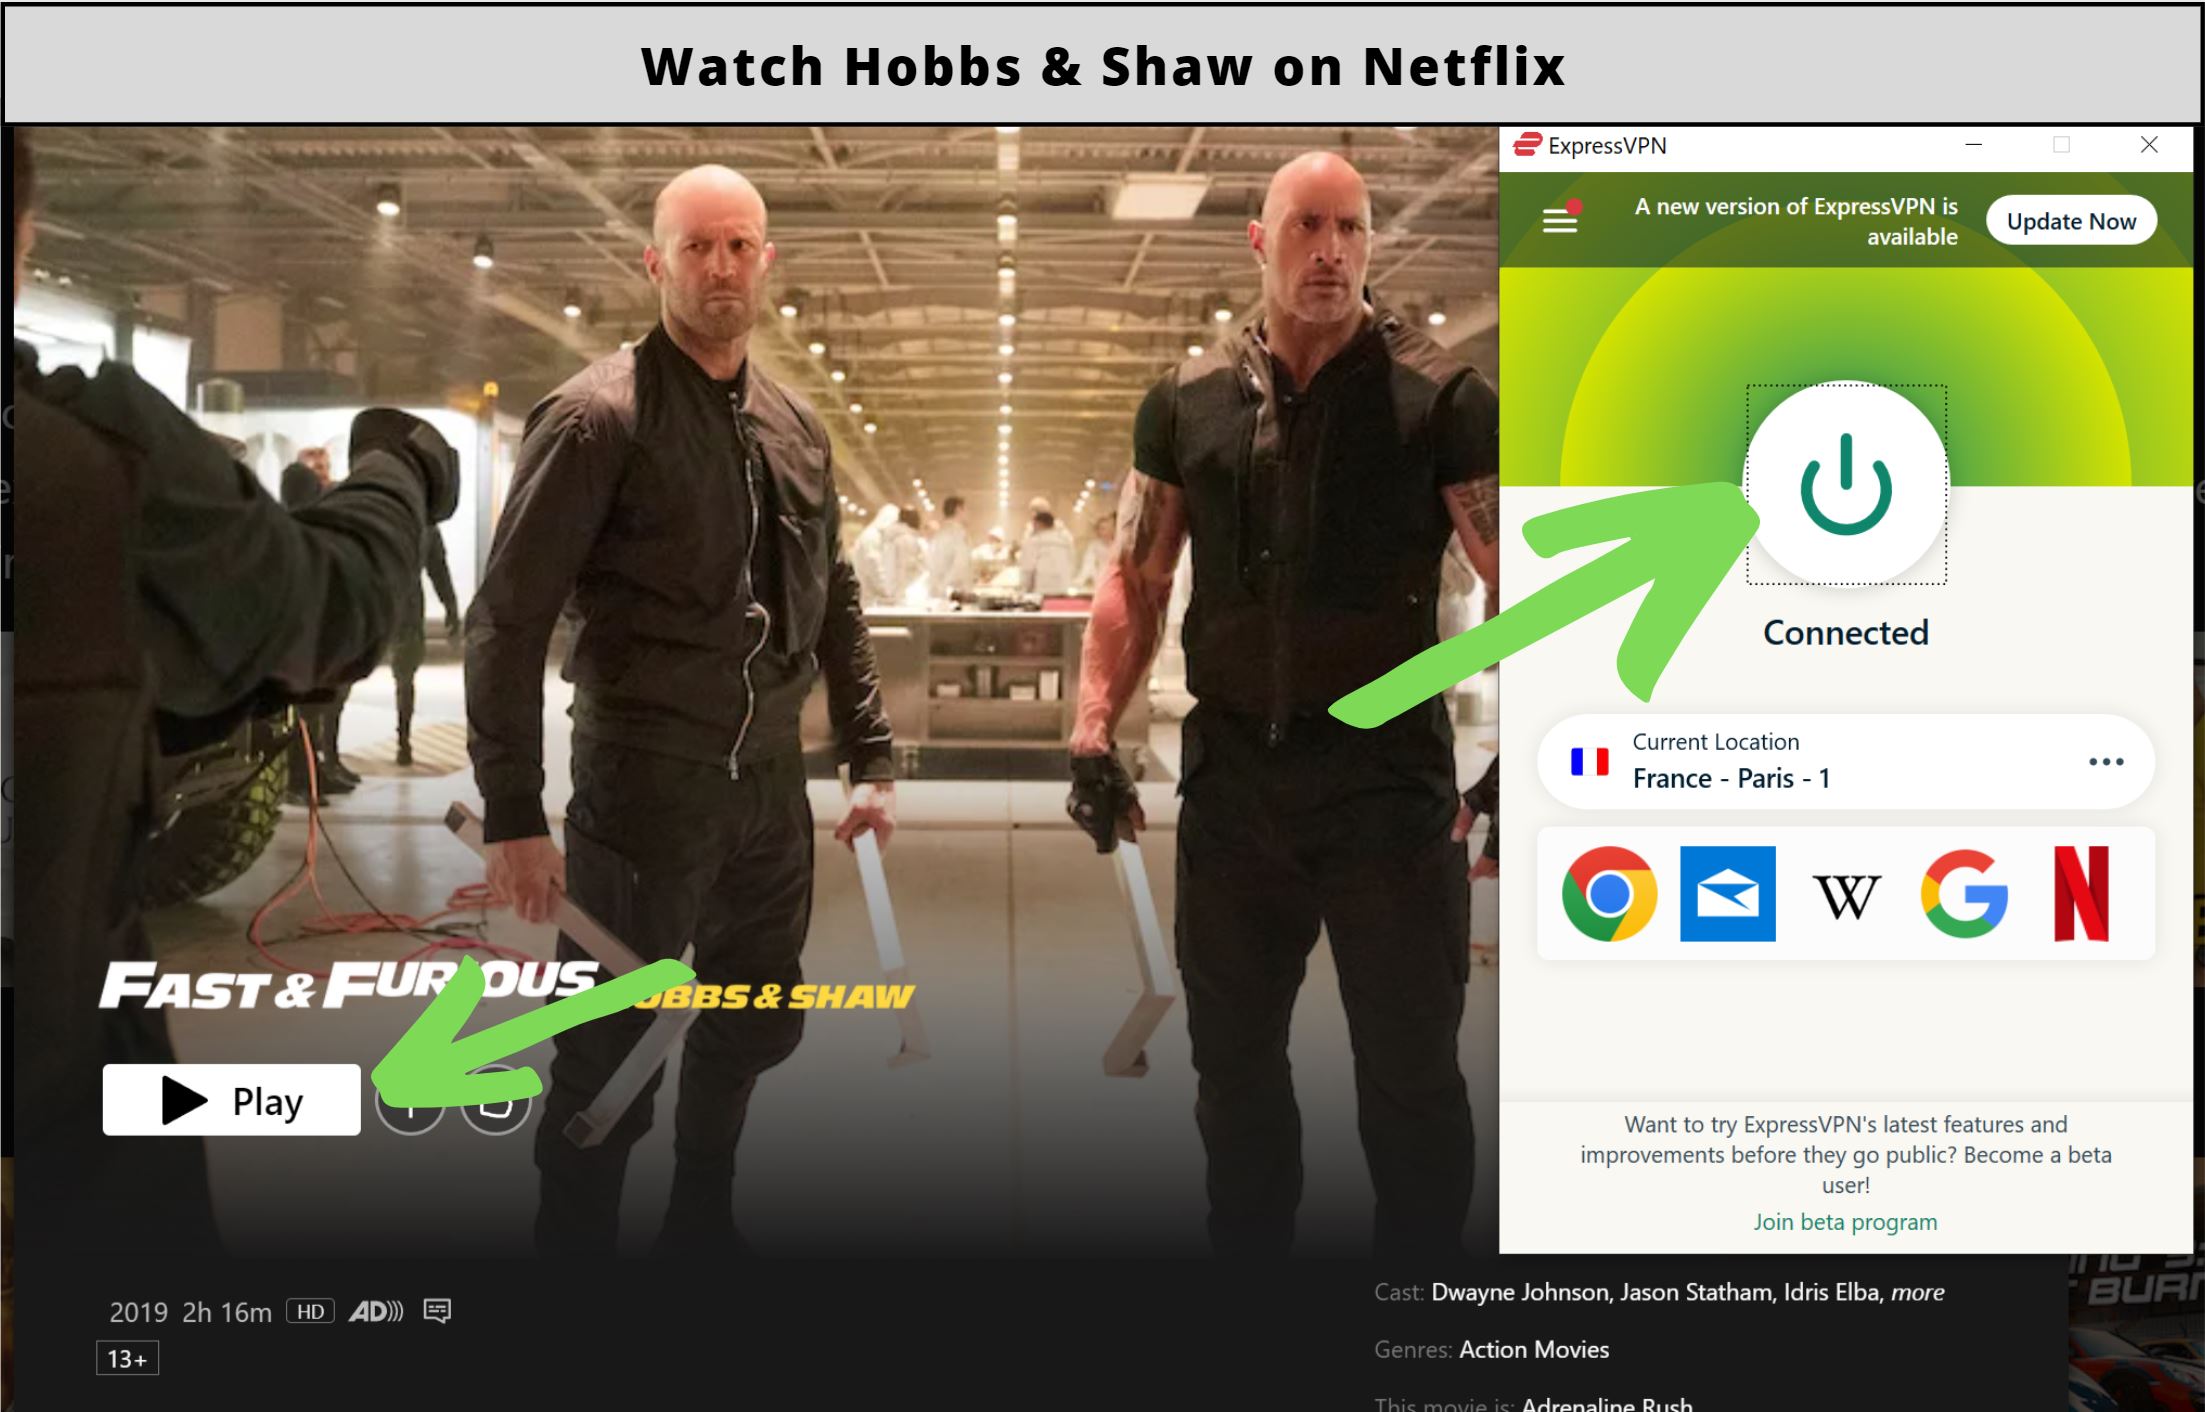 Is Hobbs and Shaw on Netflix?